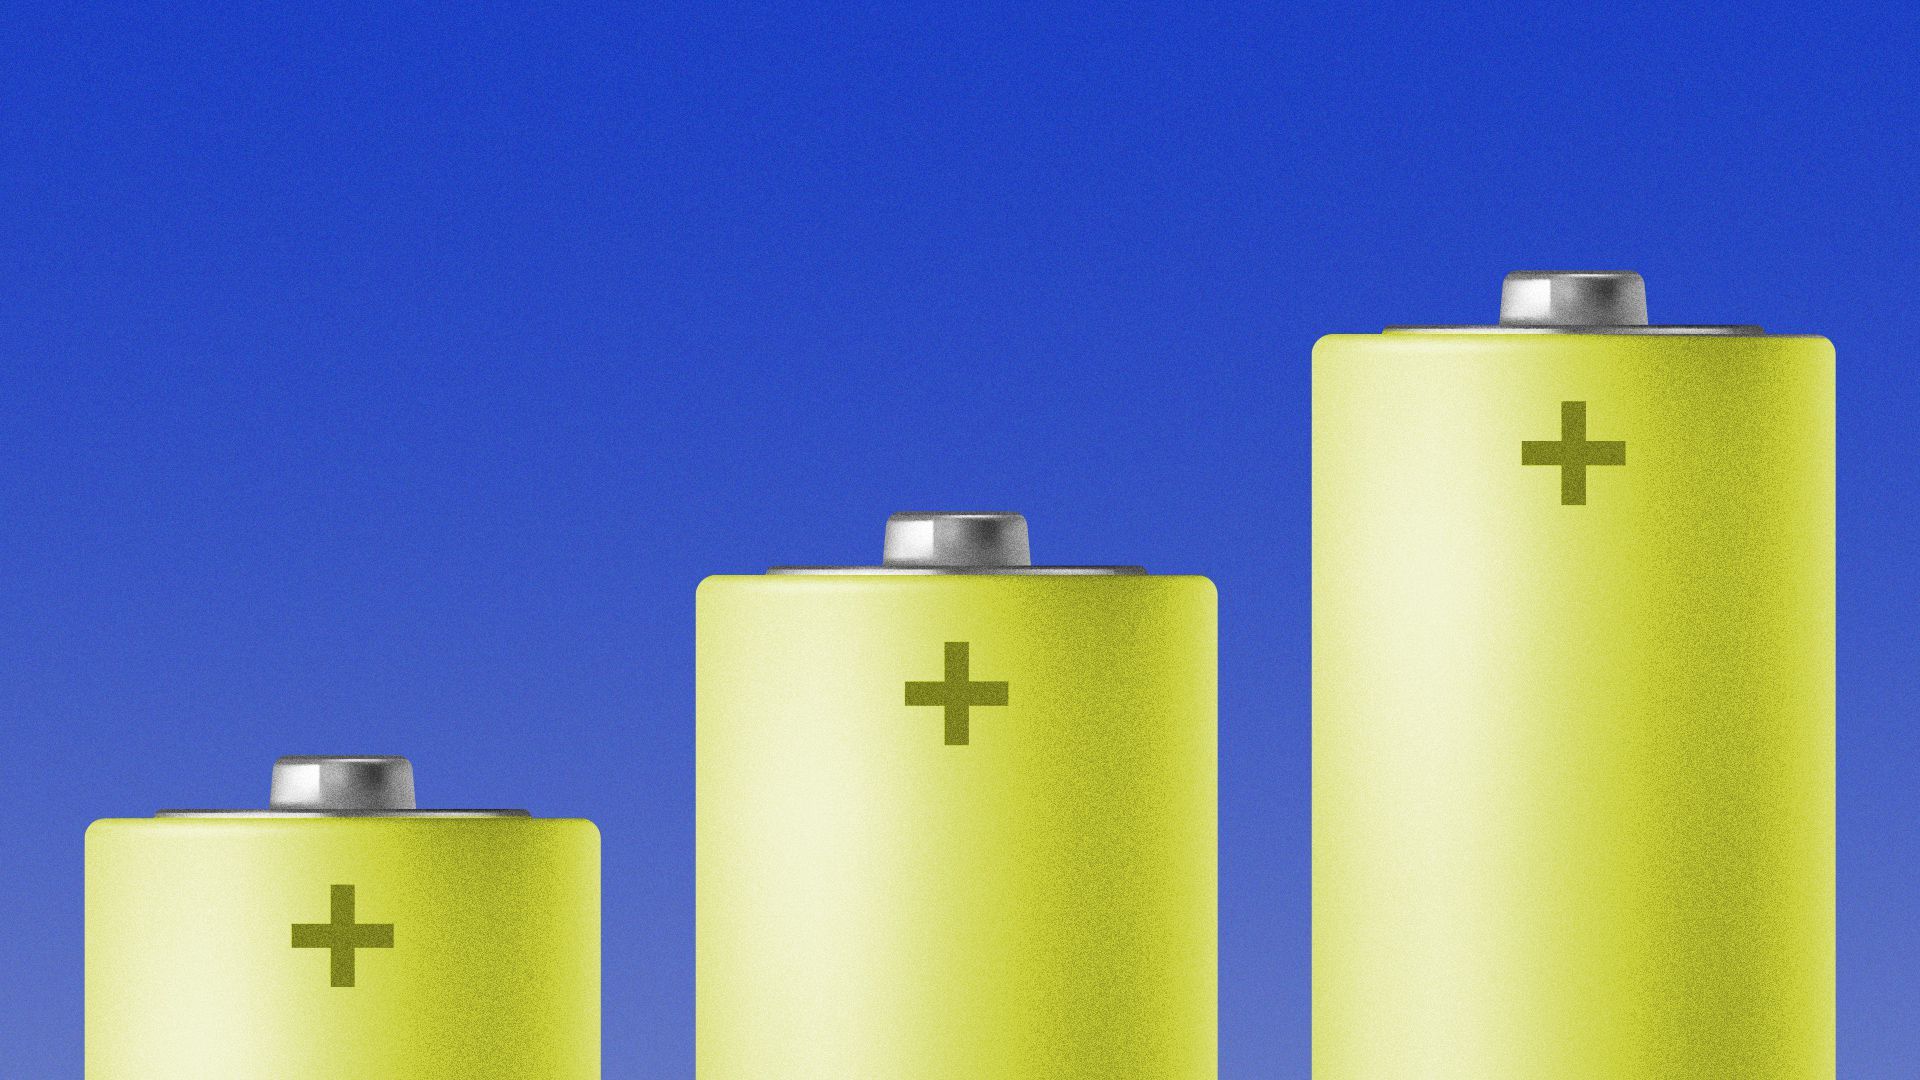 Three batteries as the bars of a bar chart, each one increasing in height.